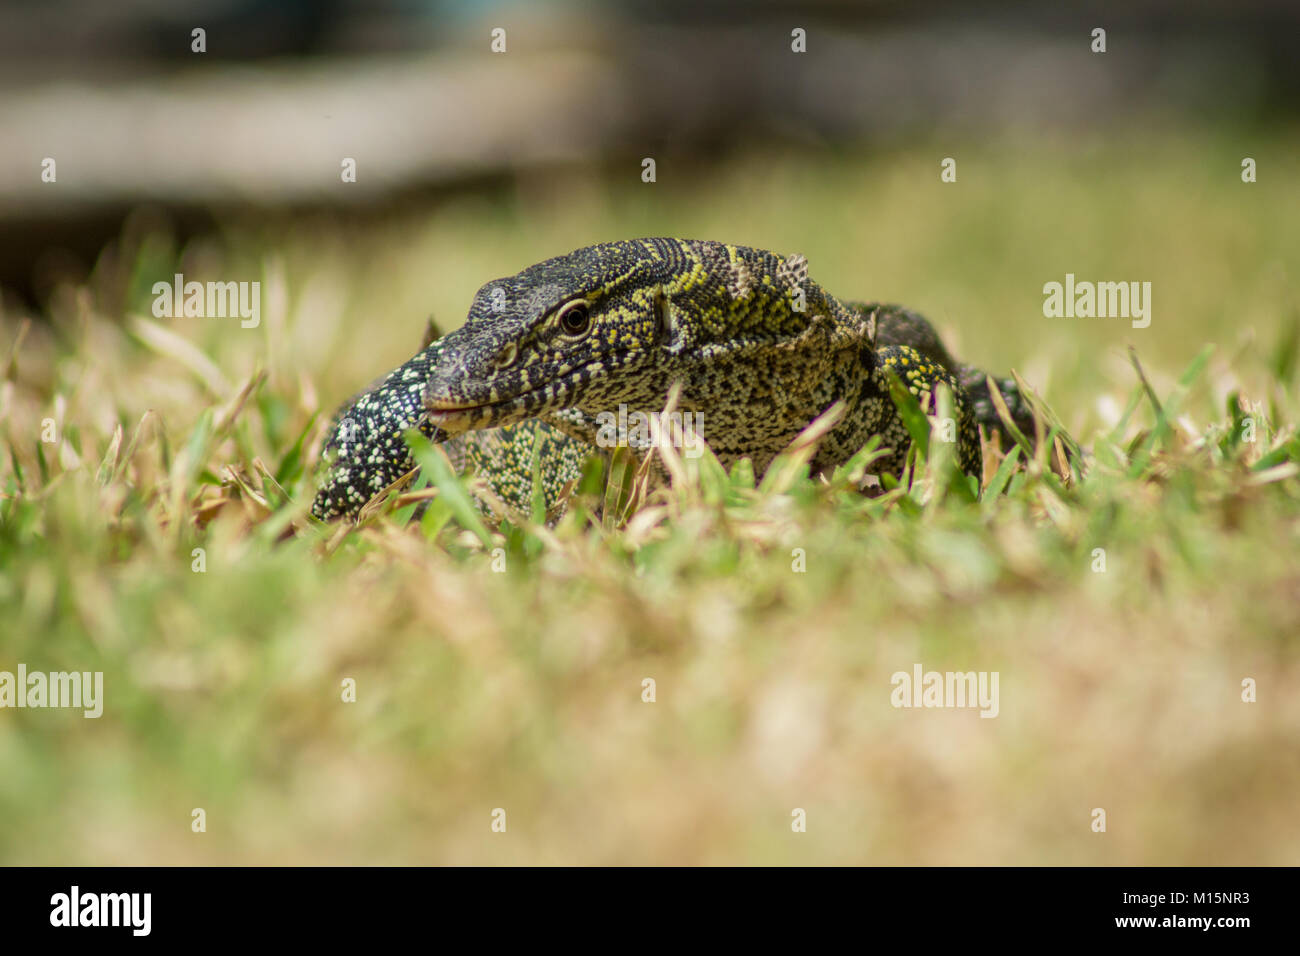 A wild Varanus stellatus also known as the Nile Monitor lizard in Gambia, West Africa Stock Photo